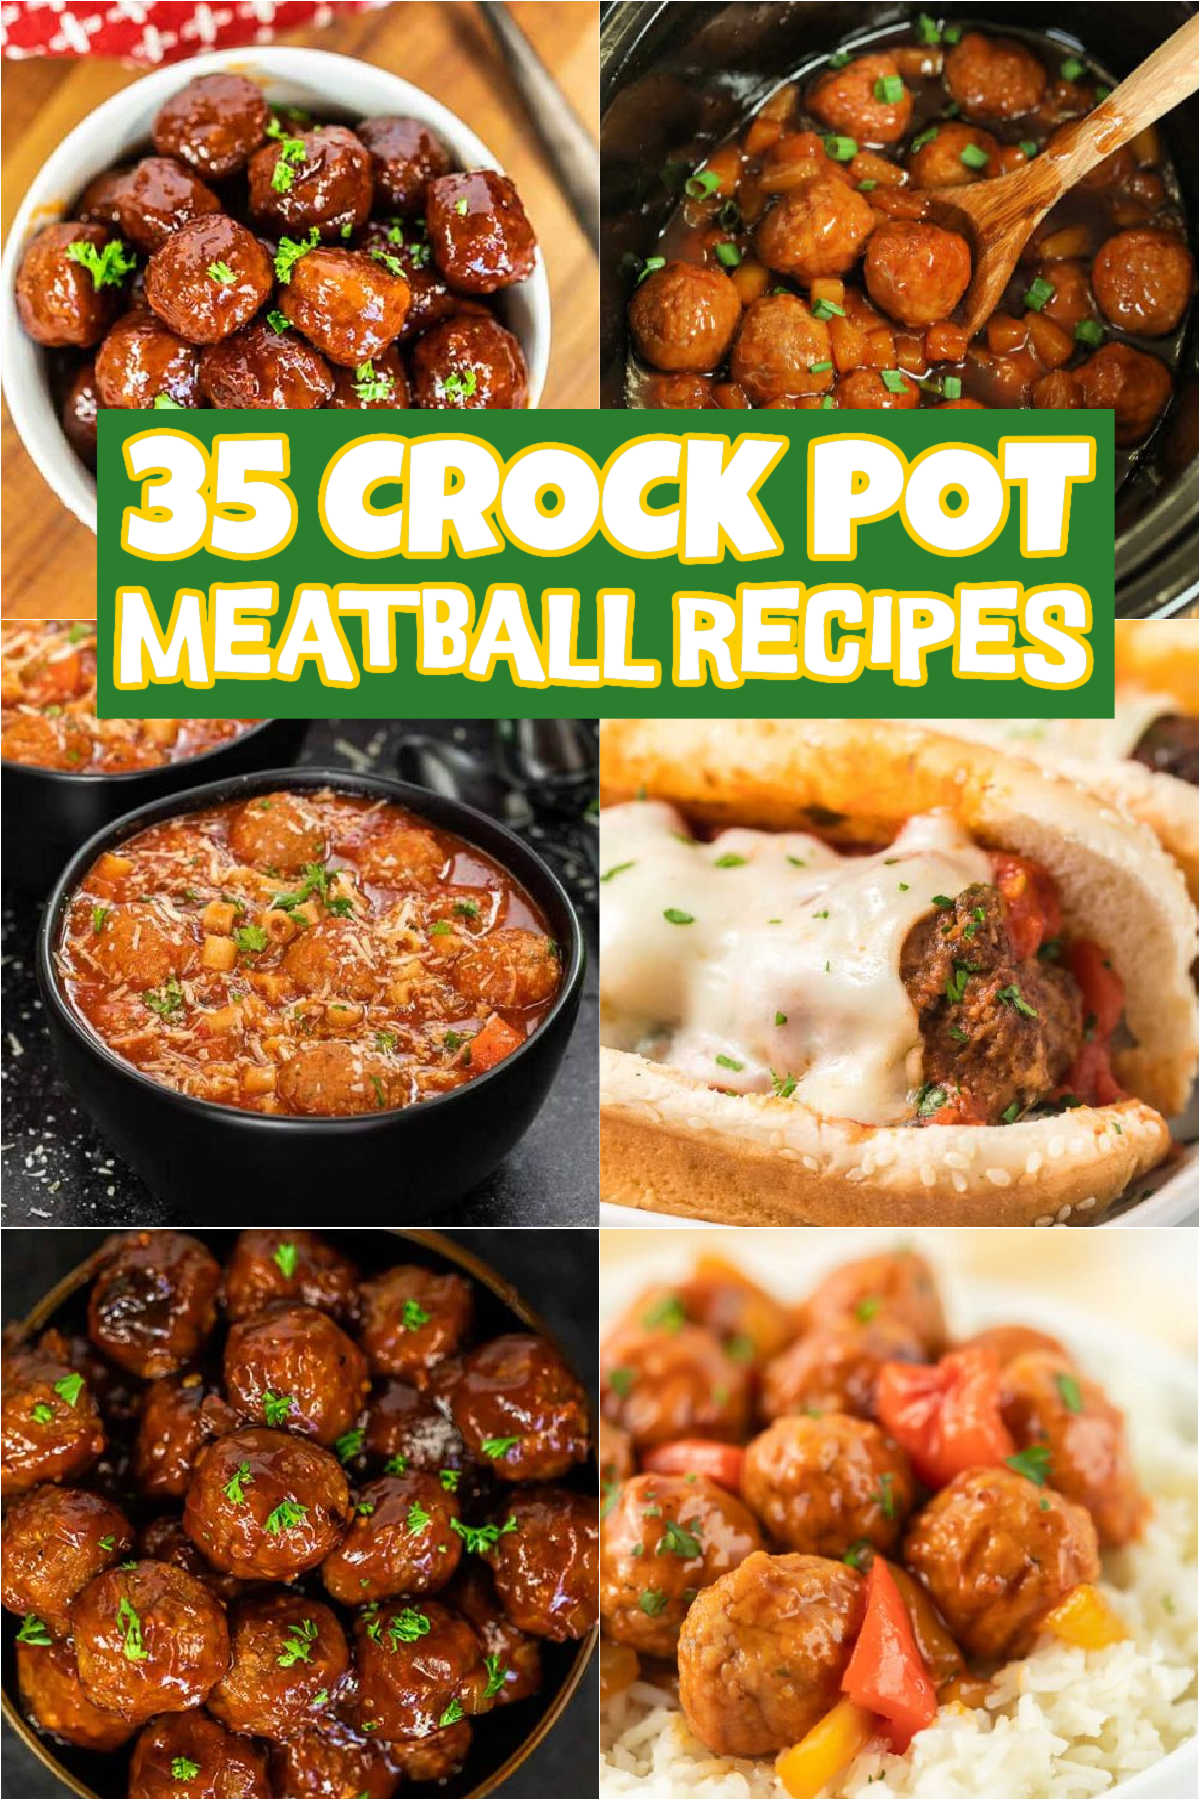 If you are looking for an easy appetizer or a delicious weeknight meal, make one of these Crock Pot Meatball Recipes. These recipes are made with simple ingredients. These crockpot meatball recipes are kid approved and one of my favorite weeknight meals to make. #eatingonadime #crockpotmeatballrecipes #meatballrecipes